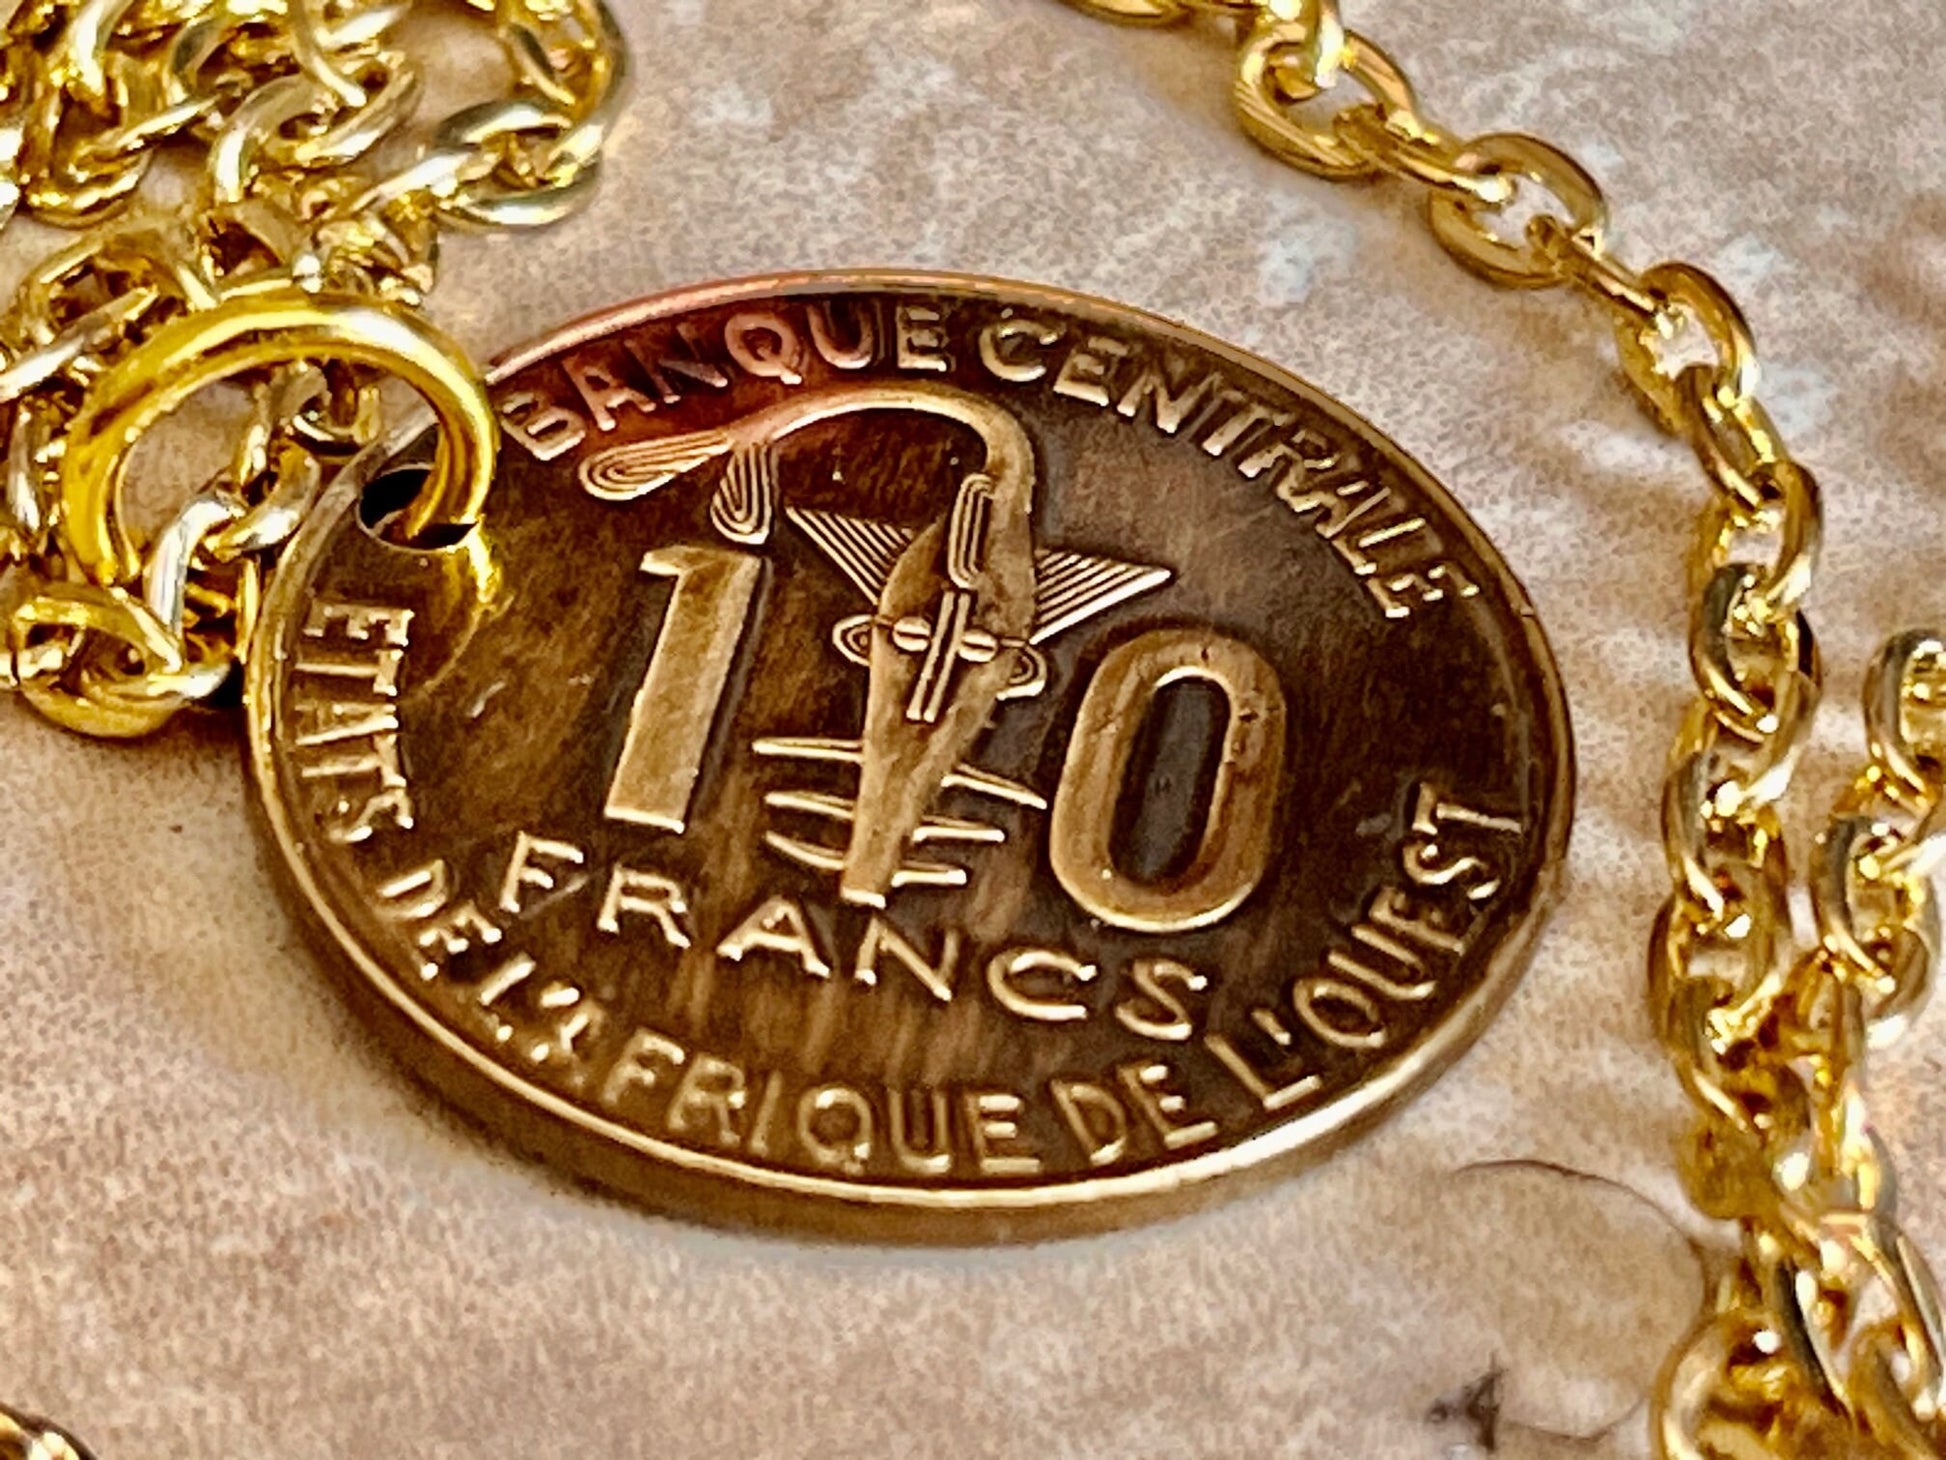 South Africa Coin 10 Francs African Pendant Necklace Fashion Jewelry Gift For Friend Coin Charm Gift For Him, Her, World Coins Collector